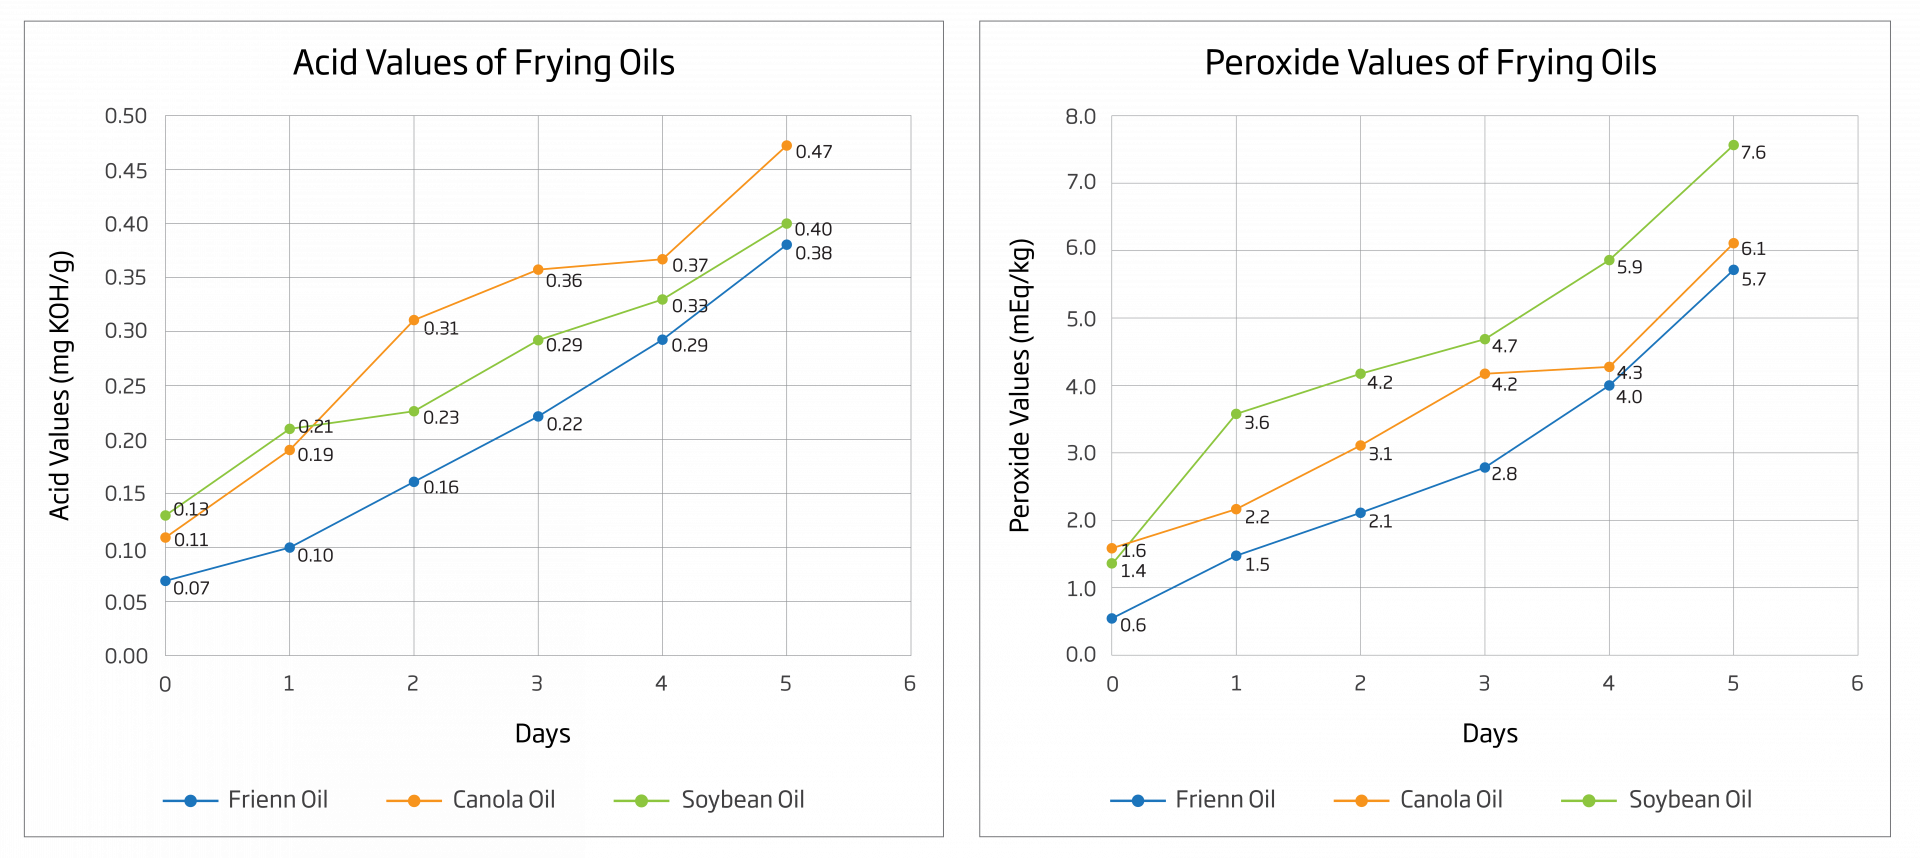 Side by Side Charts of the Acid Values and Peroxide Values of Frienn, Canola, and Soybean Oil